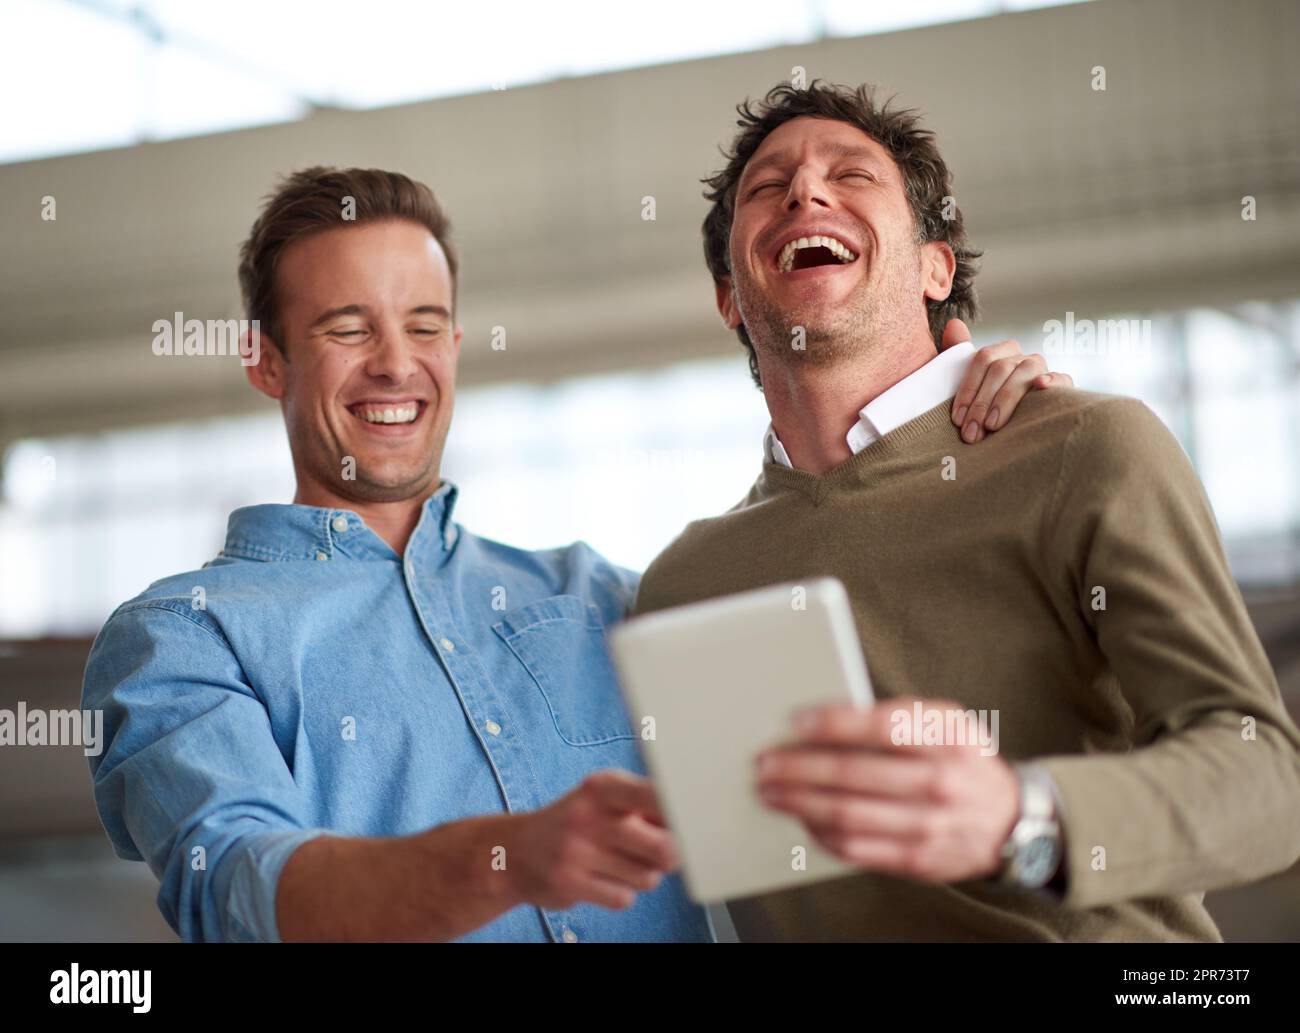 Take time out for a good old laugh. Male coworkers laughing out loud about something humorous on a digital tablet in their office. Stock Photo